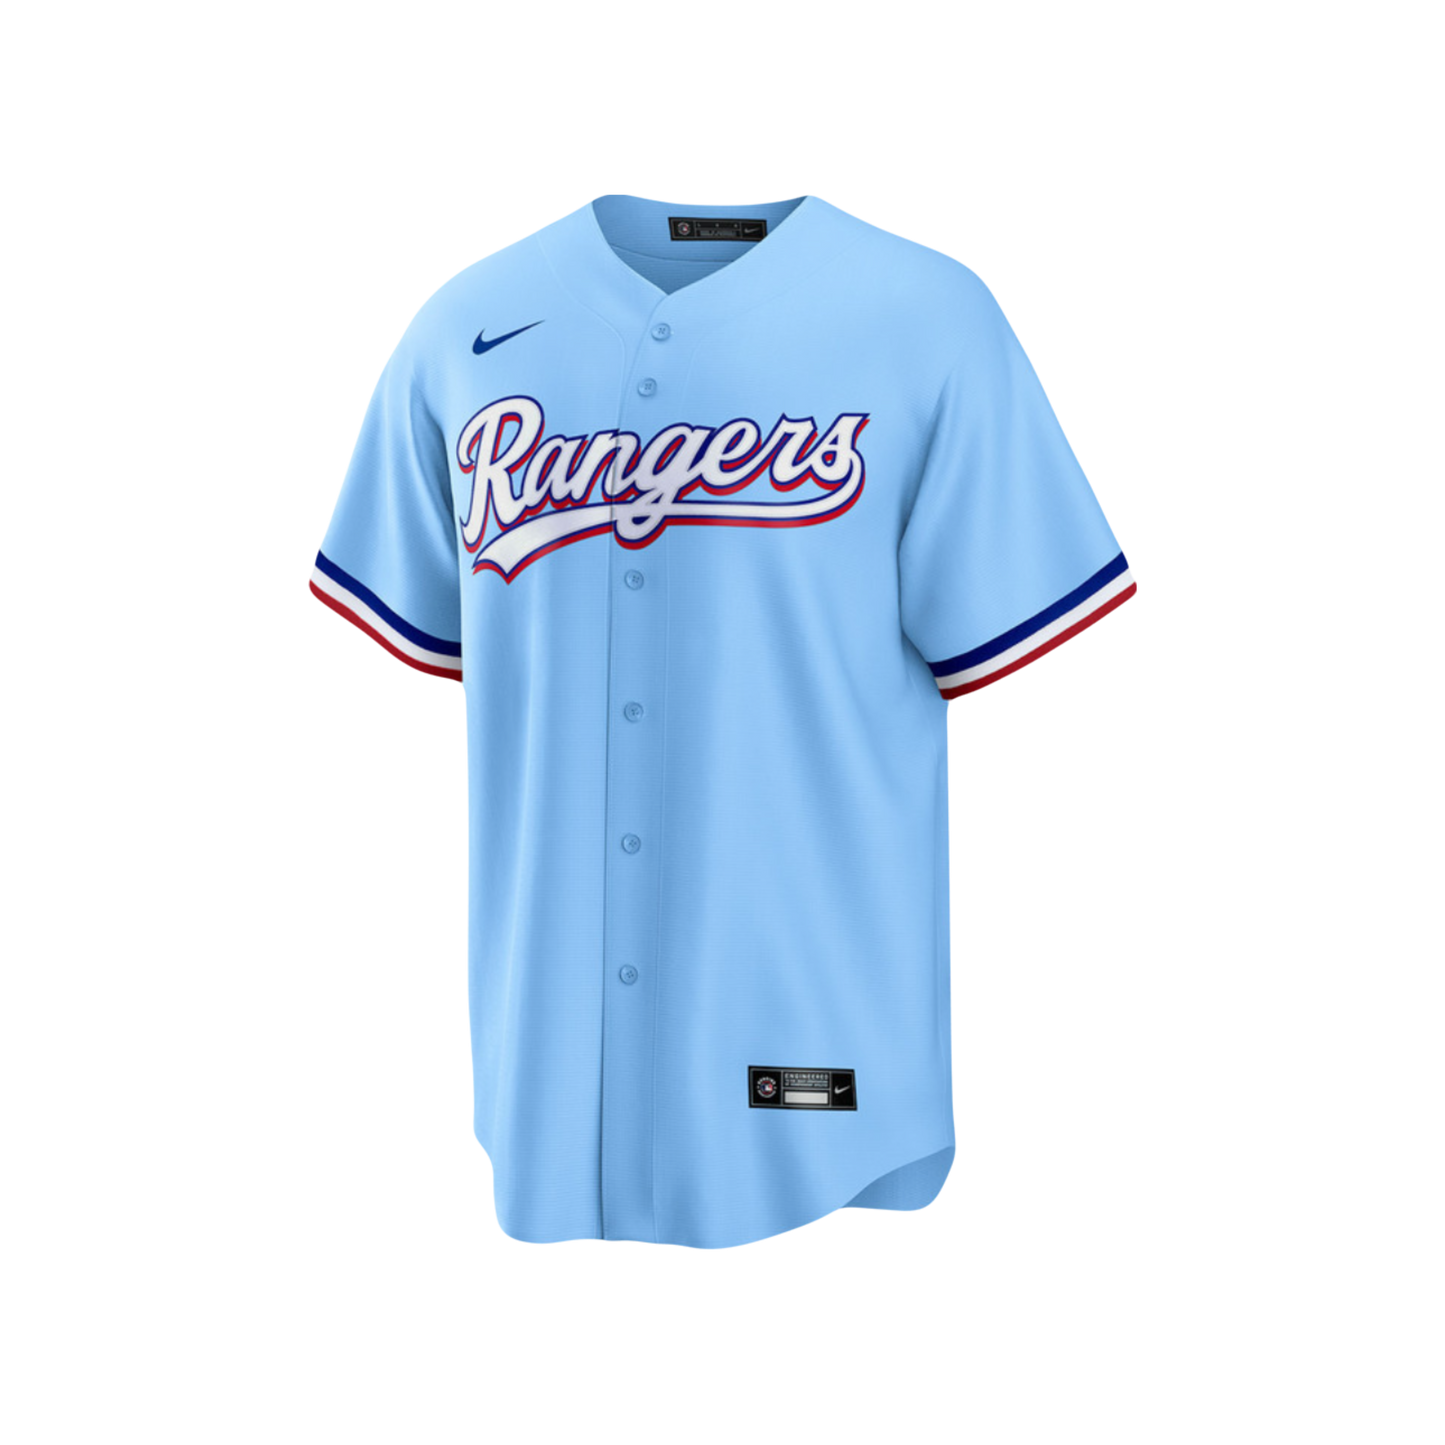 Cory Seager Texas Rangers MLB Official Nike Alternate Player Jersey - Baby Blue